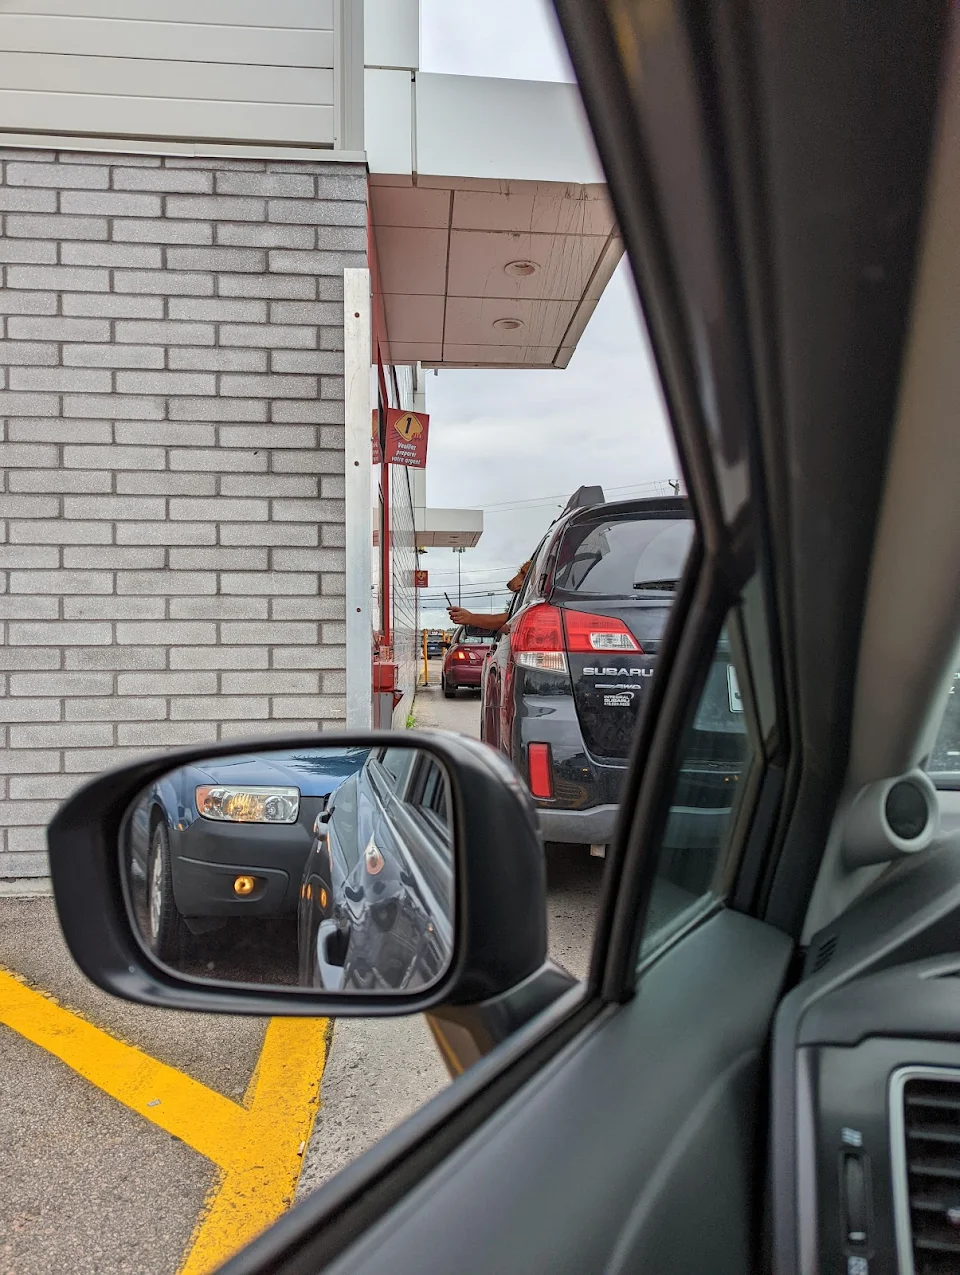 Humanoid doggo spotted paying for its treats in drivethrough.